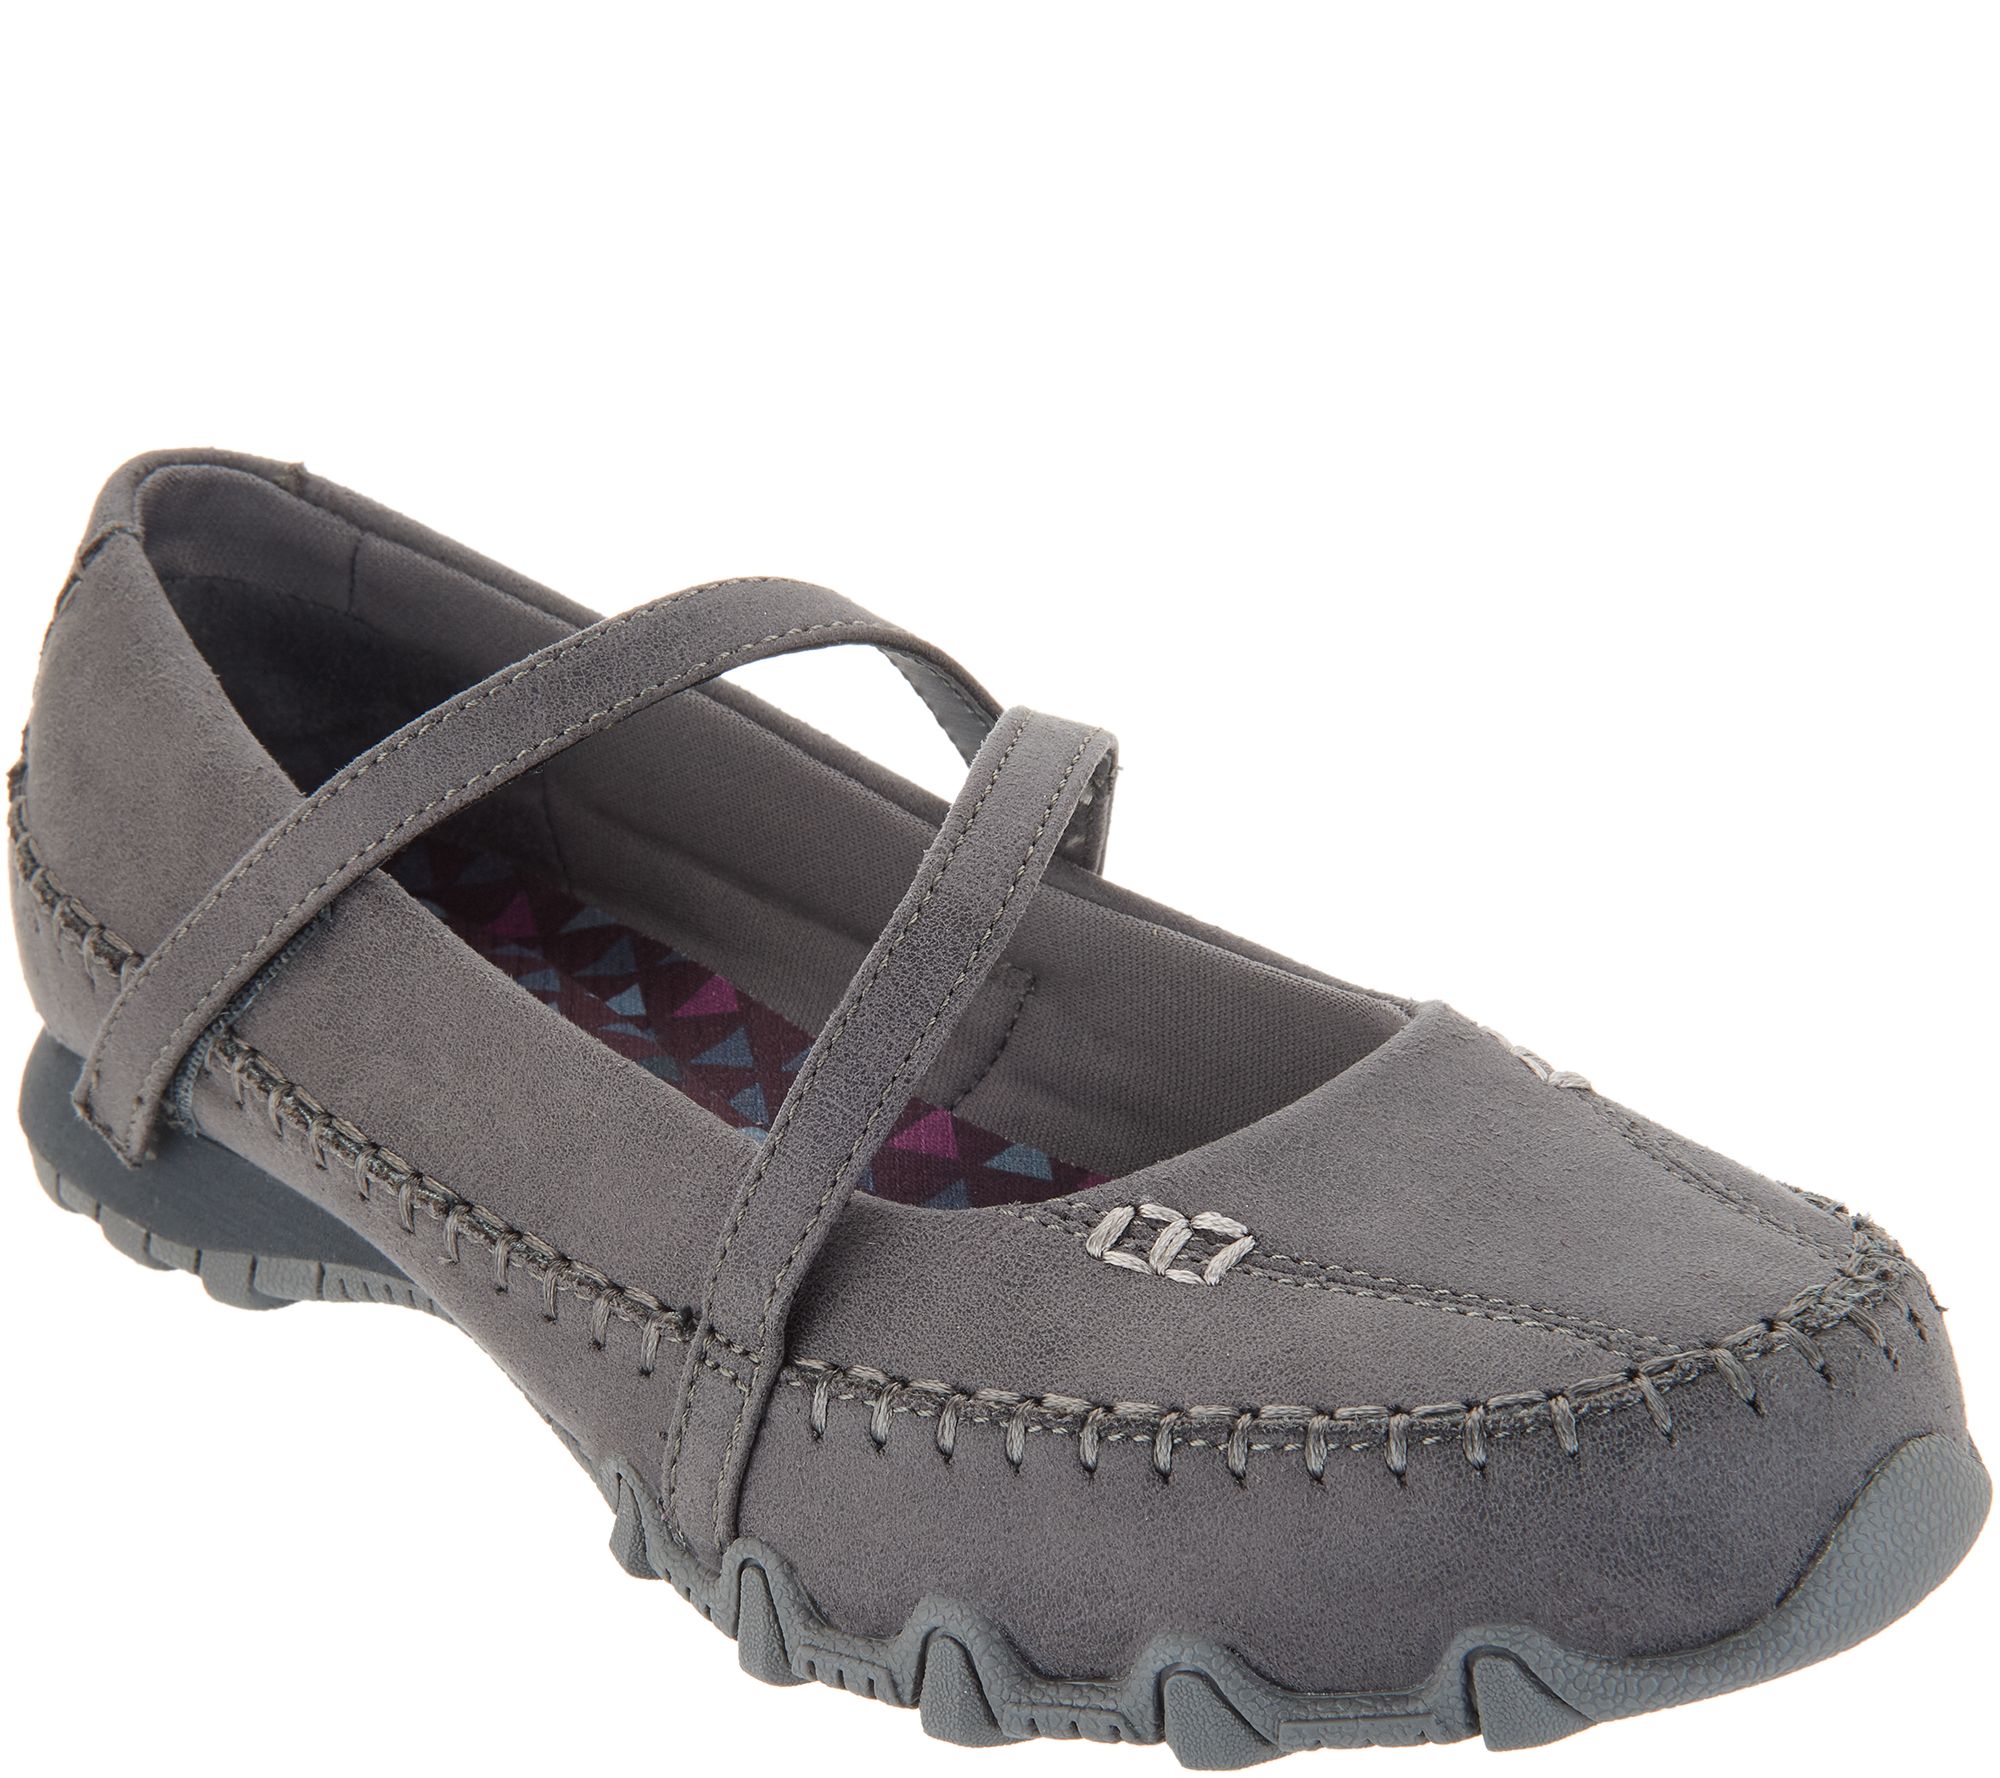 skechers heathered bungee strap mary janes